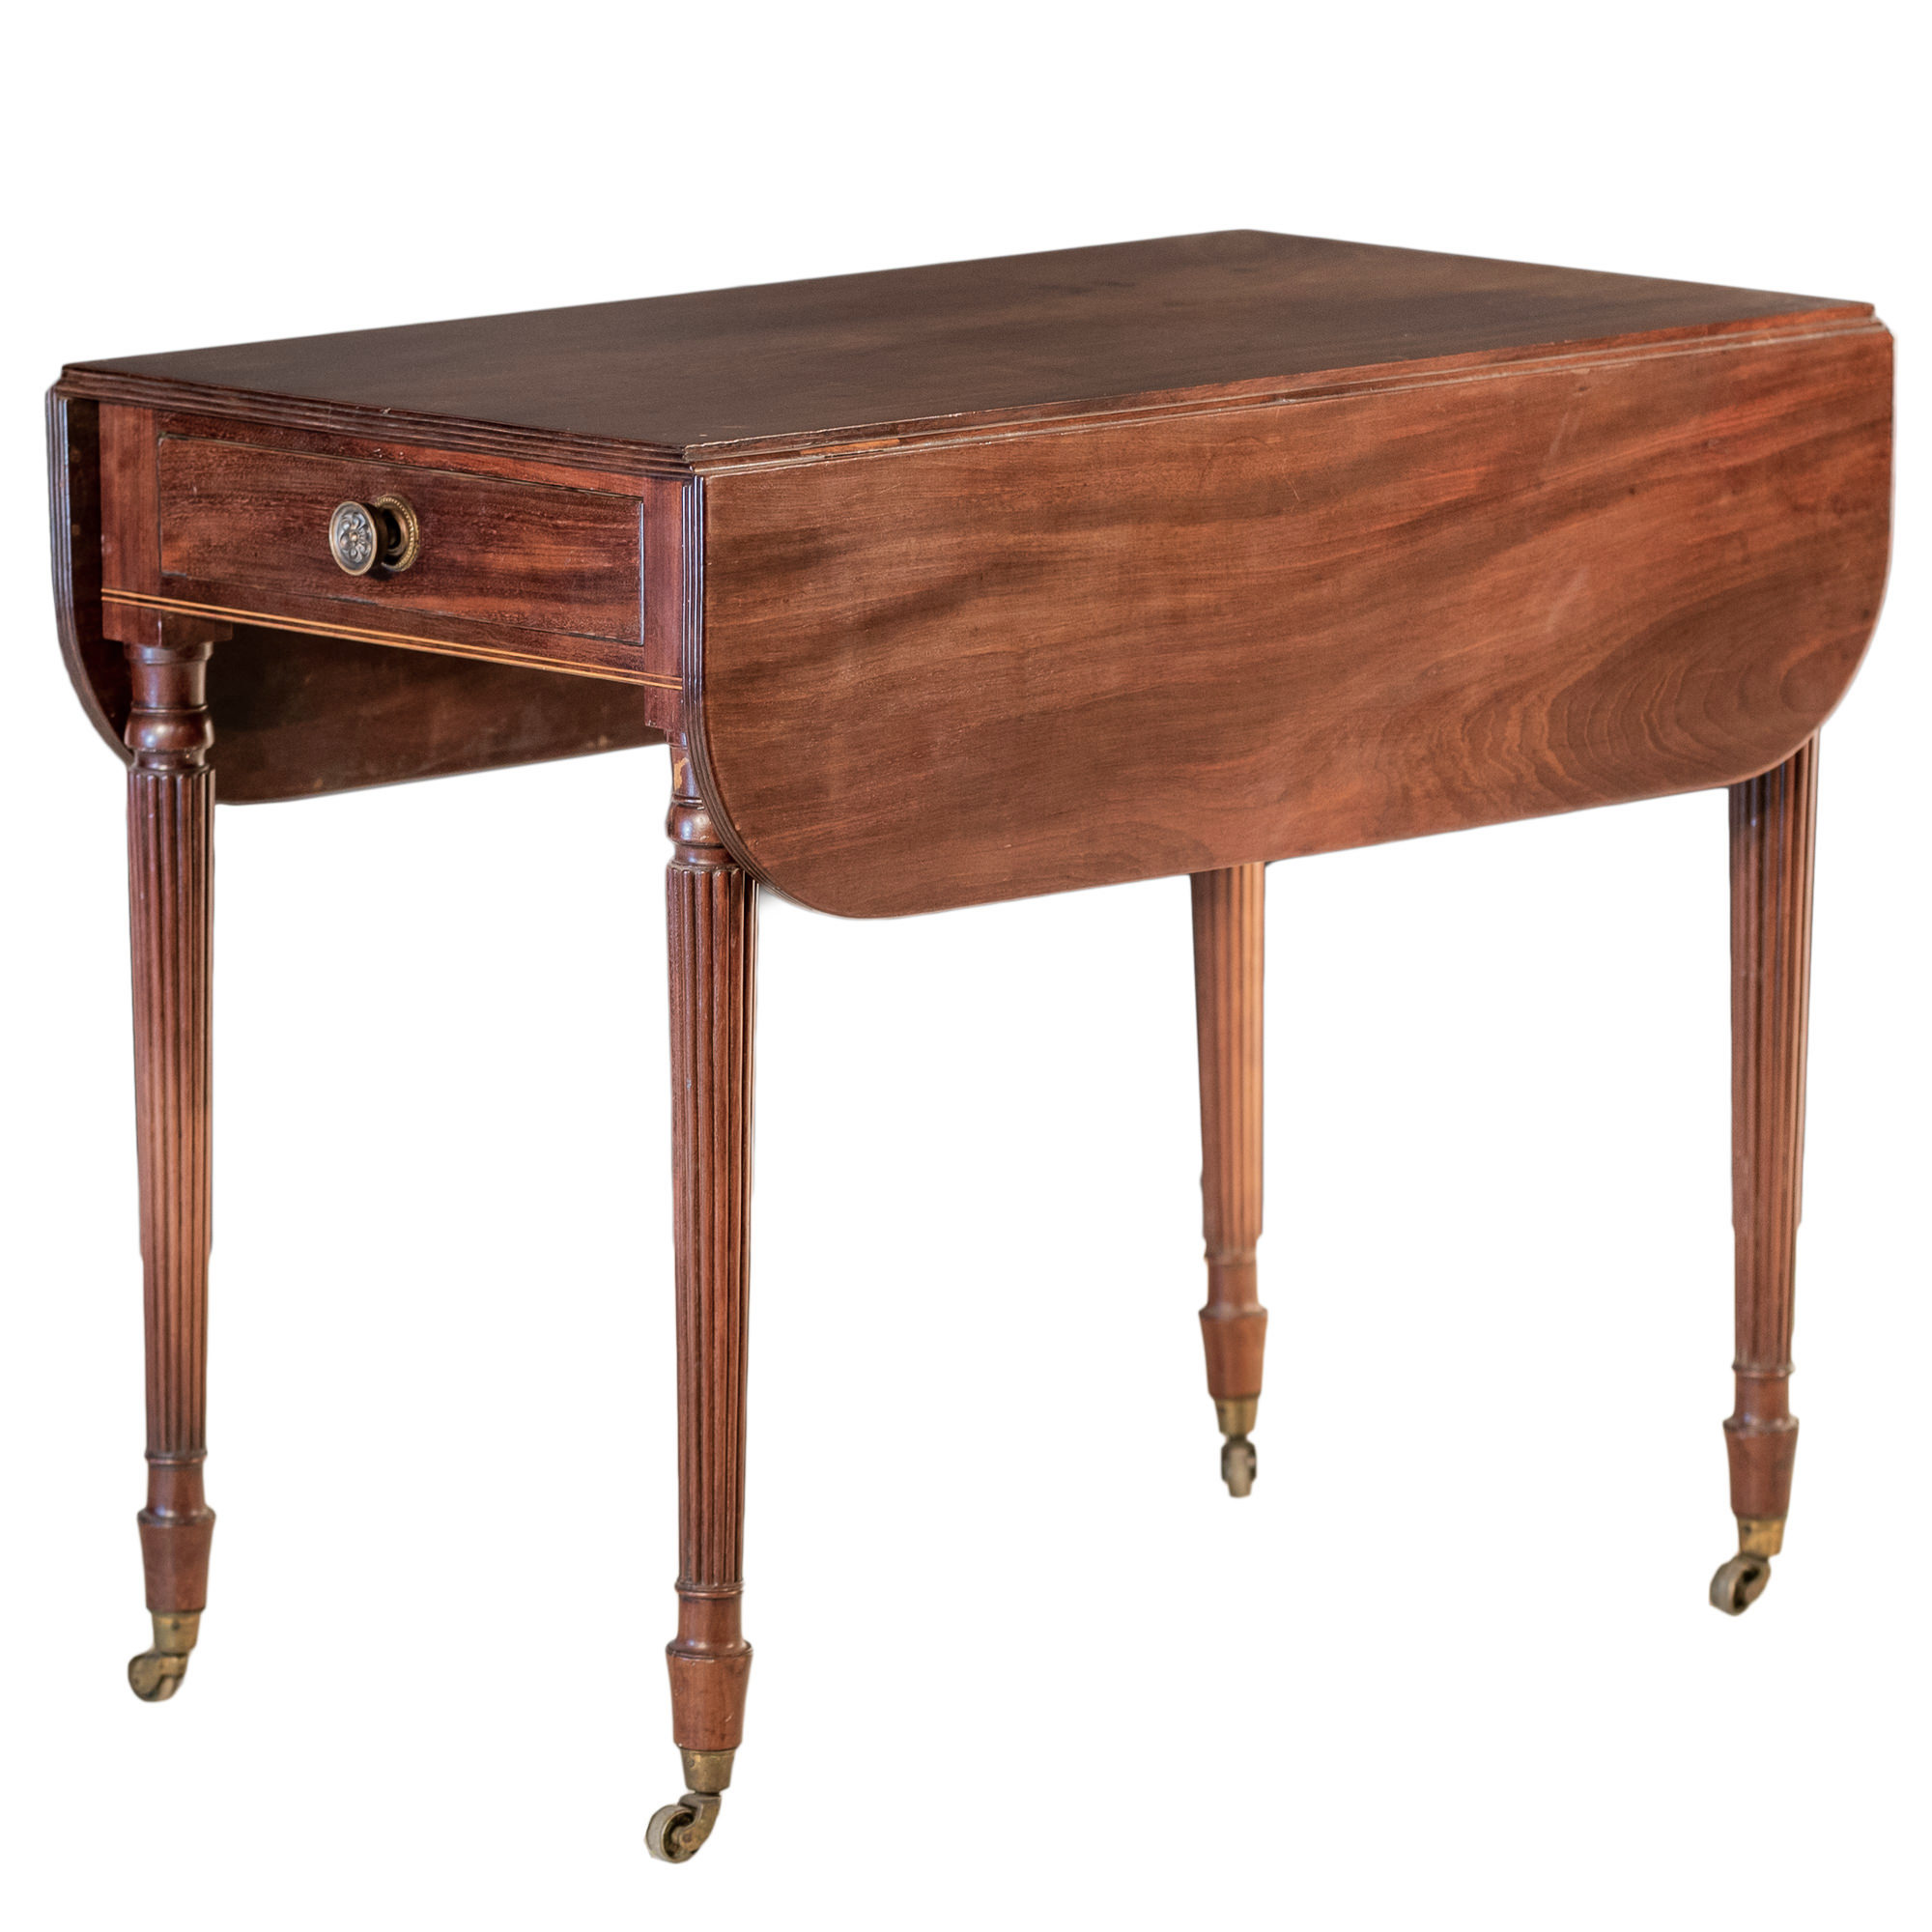 'Regency Mahogany and String Inlaid Pembroke Table with Fluted Legs Circa 1820'